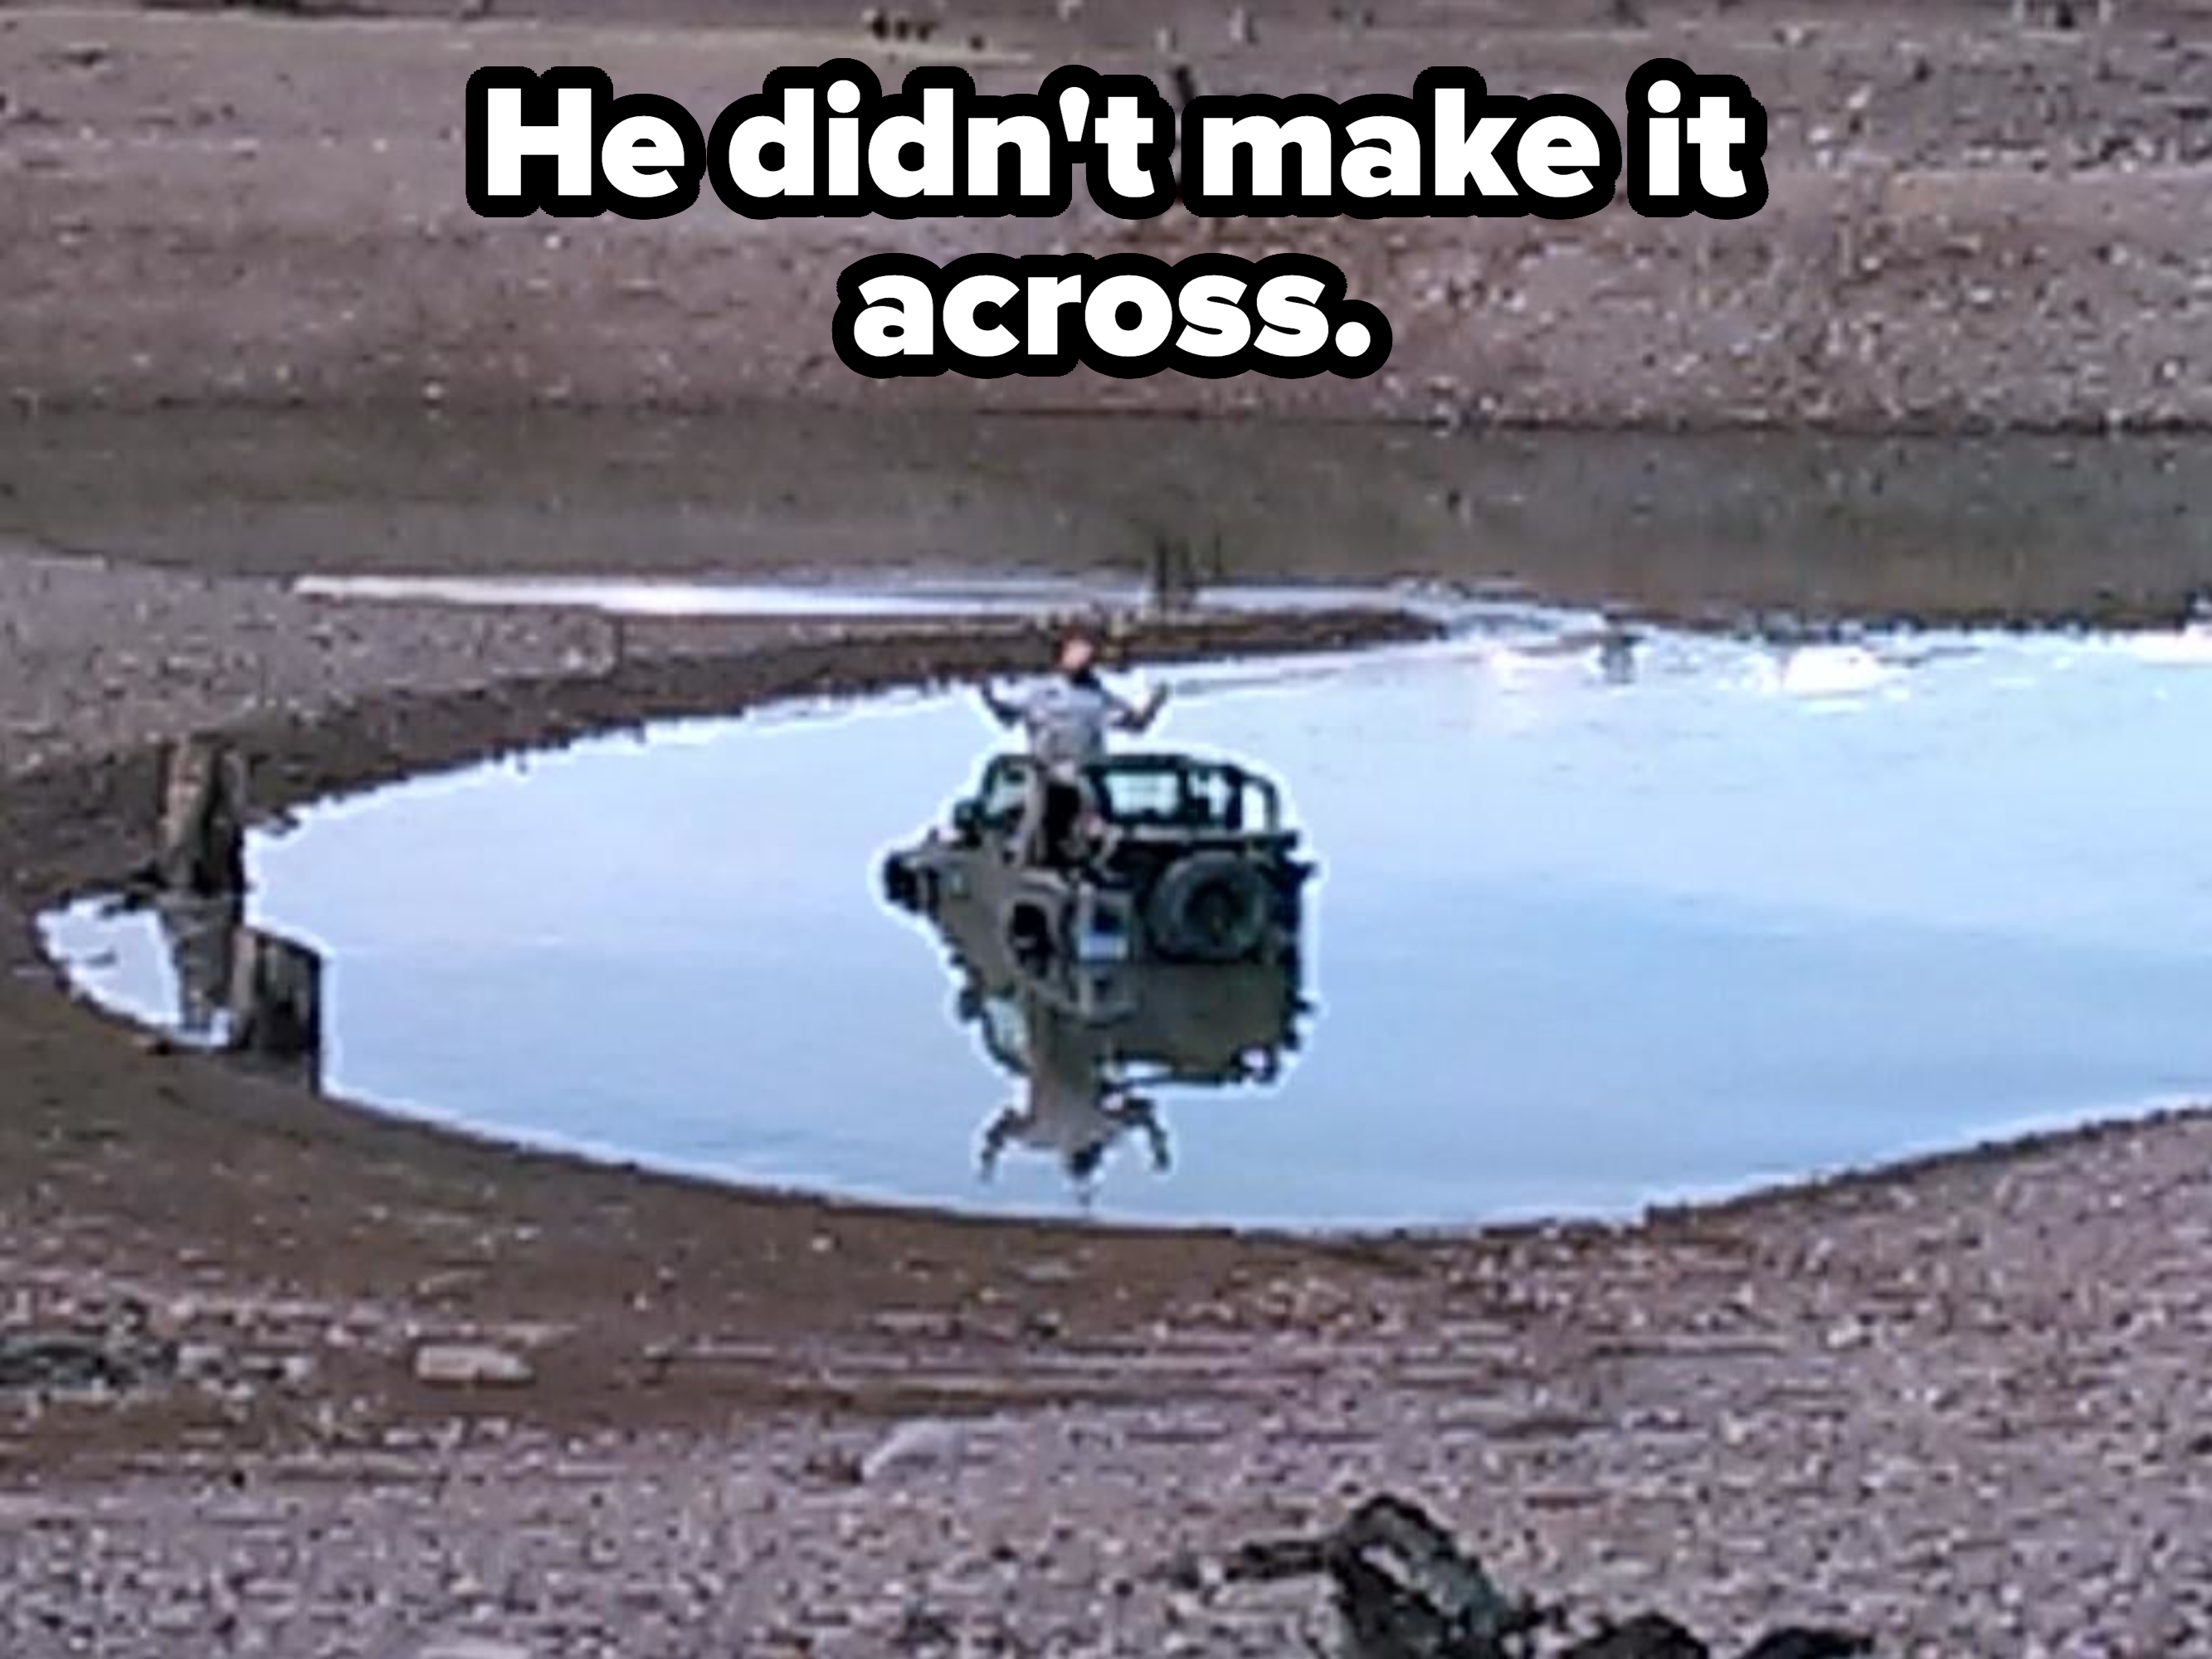 A person in a car in the middle of a body of water